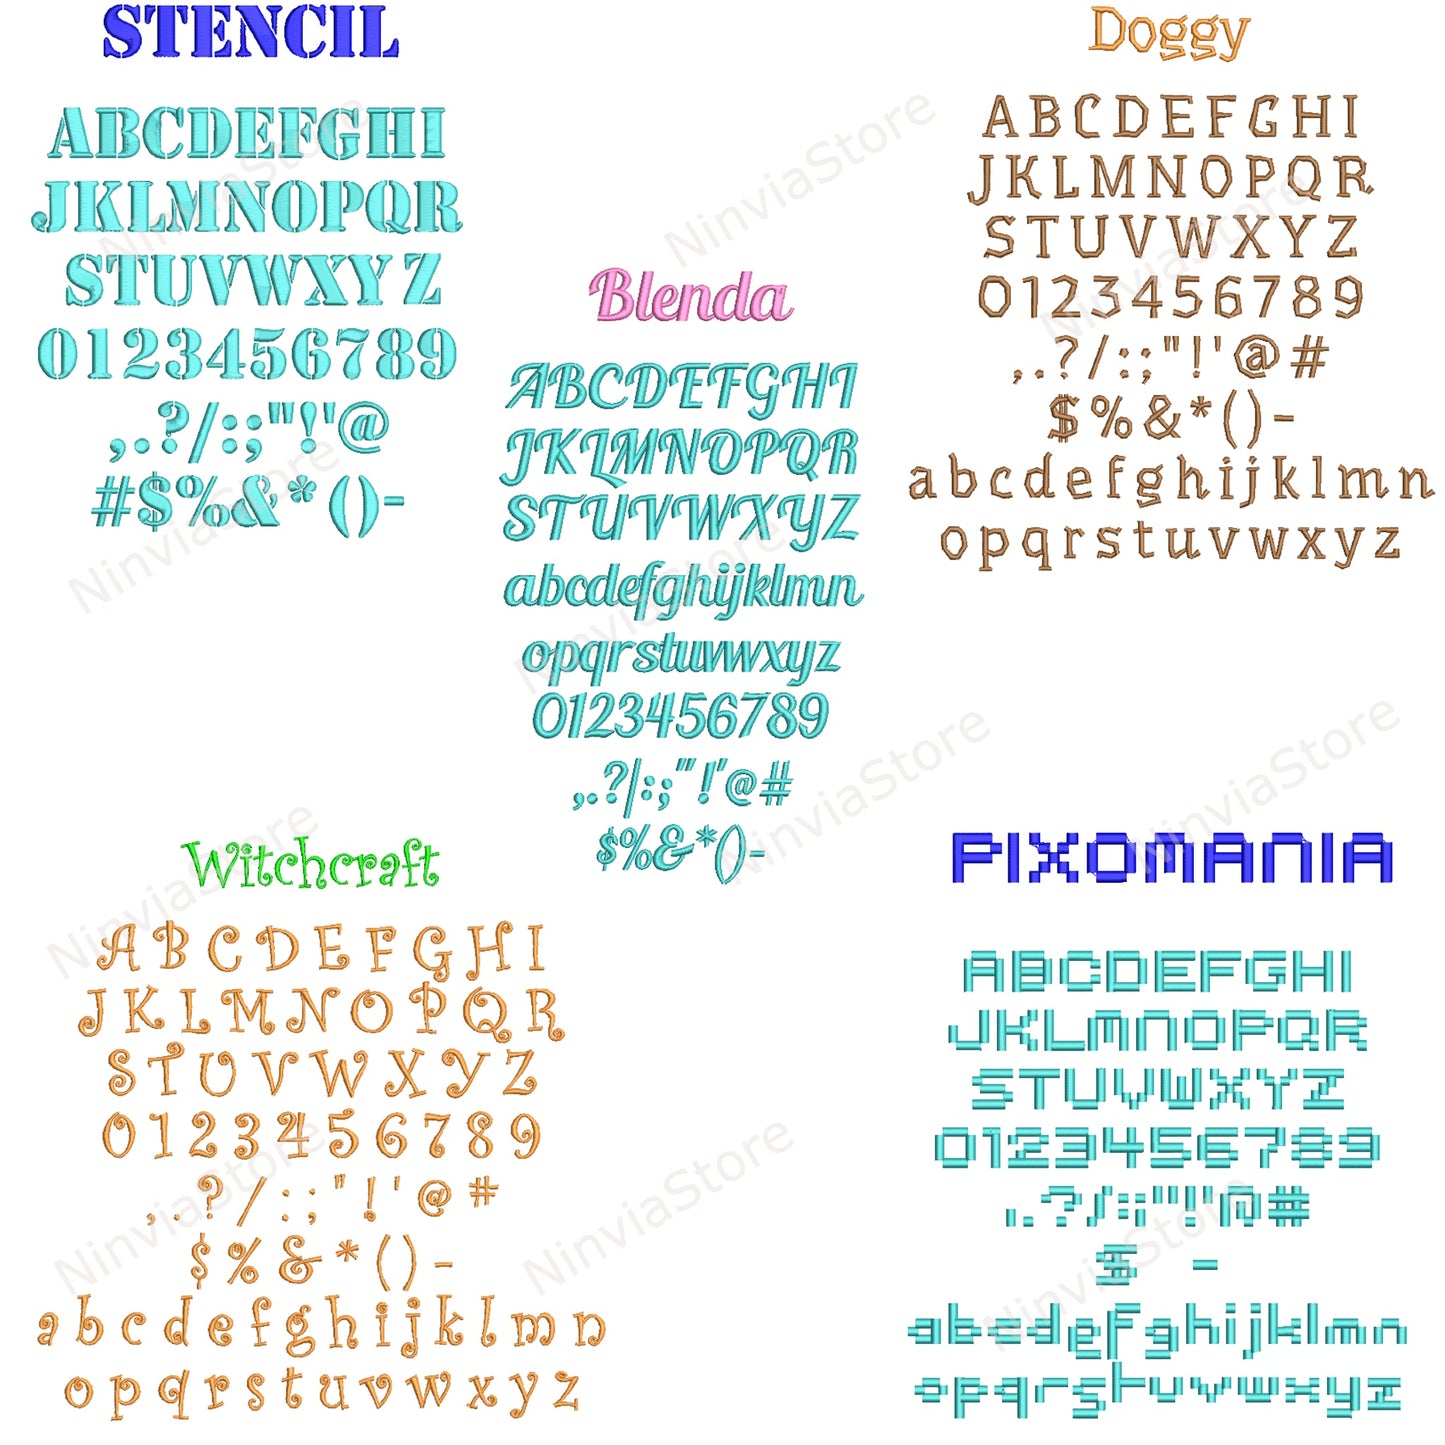 50 PES Embroidery Fonts 0.25" and 0.5" Sizes, Machine Embroidery Font pe, Alphabet Embroidery Design, pe font for Embroidery, Small Size Fonts